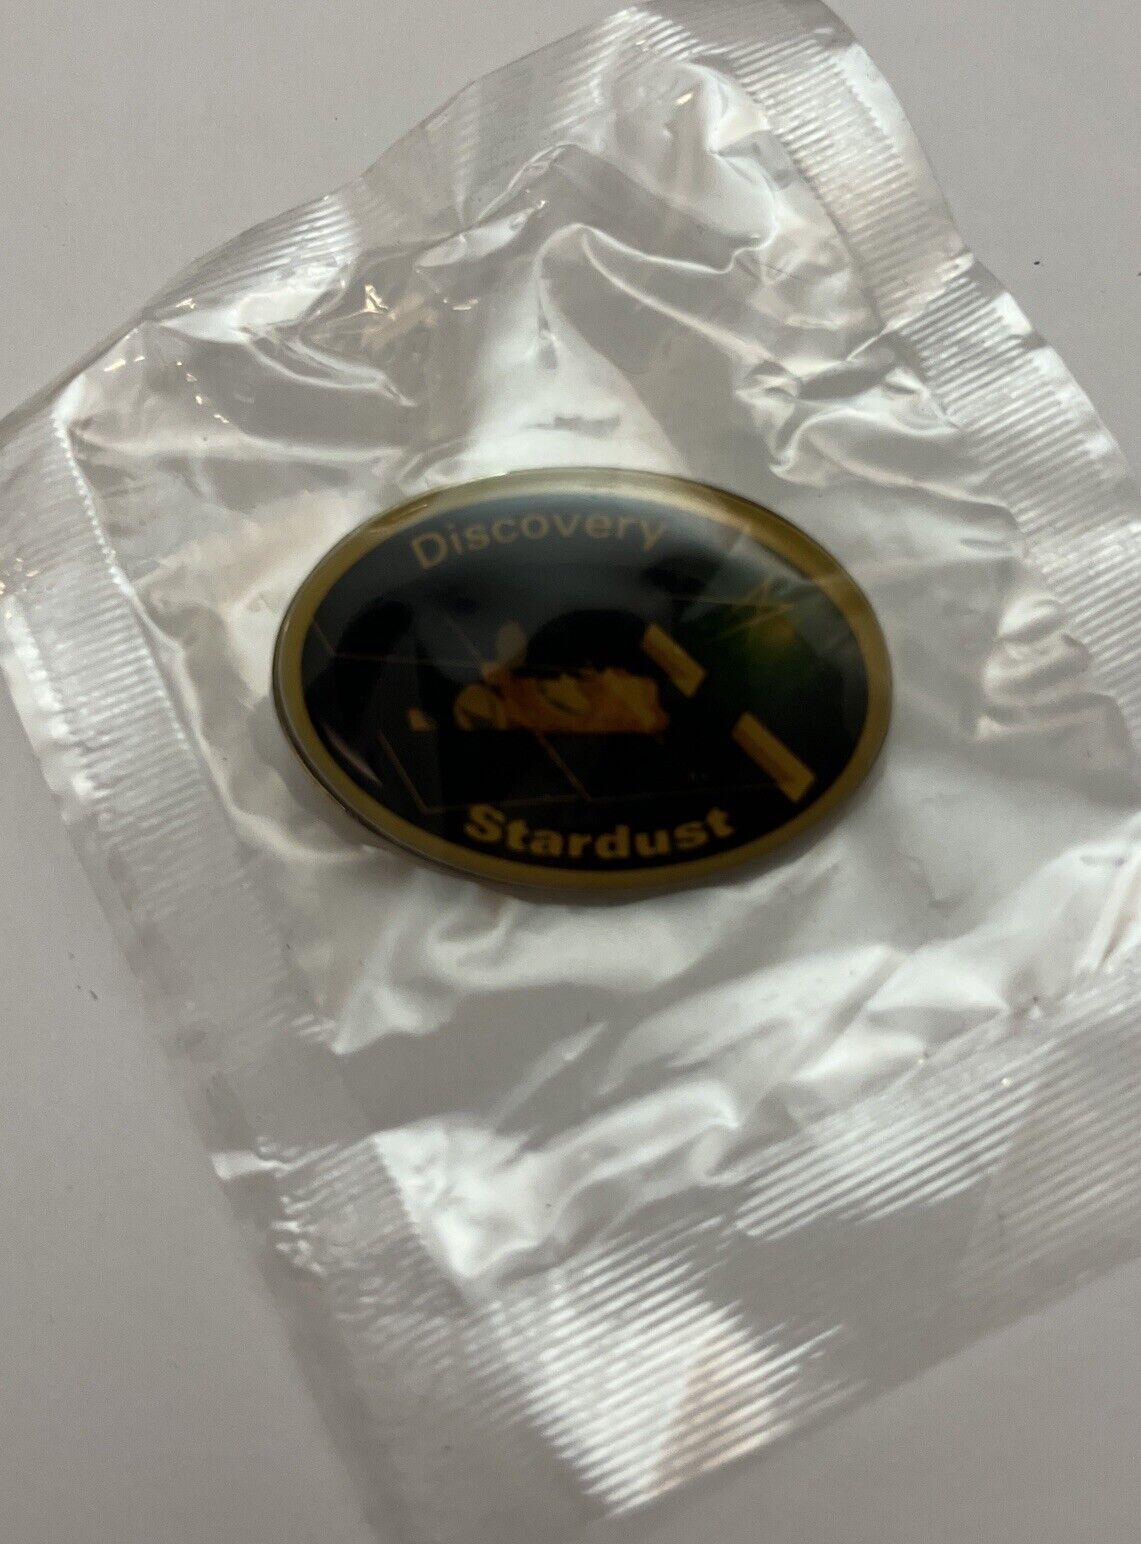 Rare NASA Discovery Stardust Commemorative Pin NEW In Package